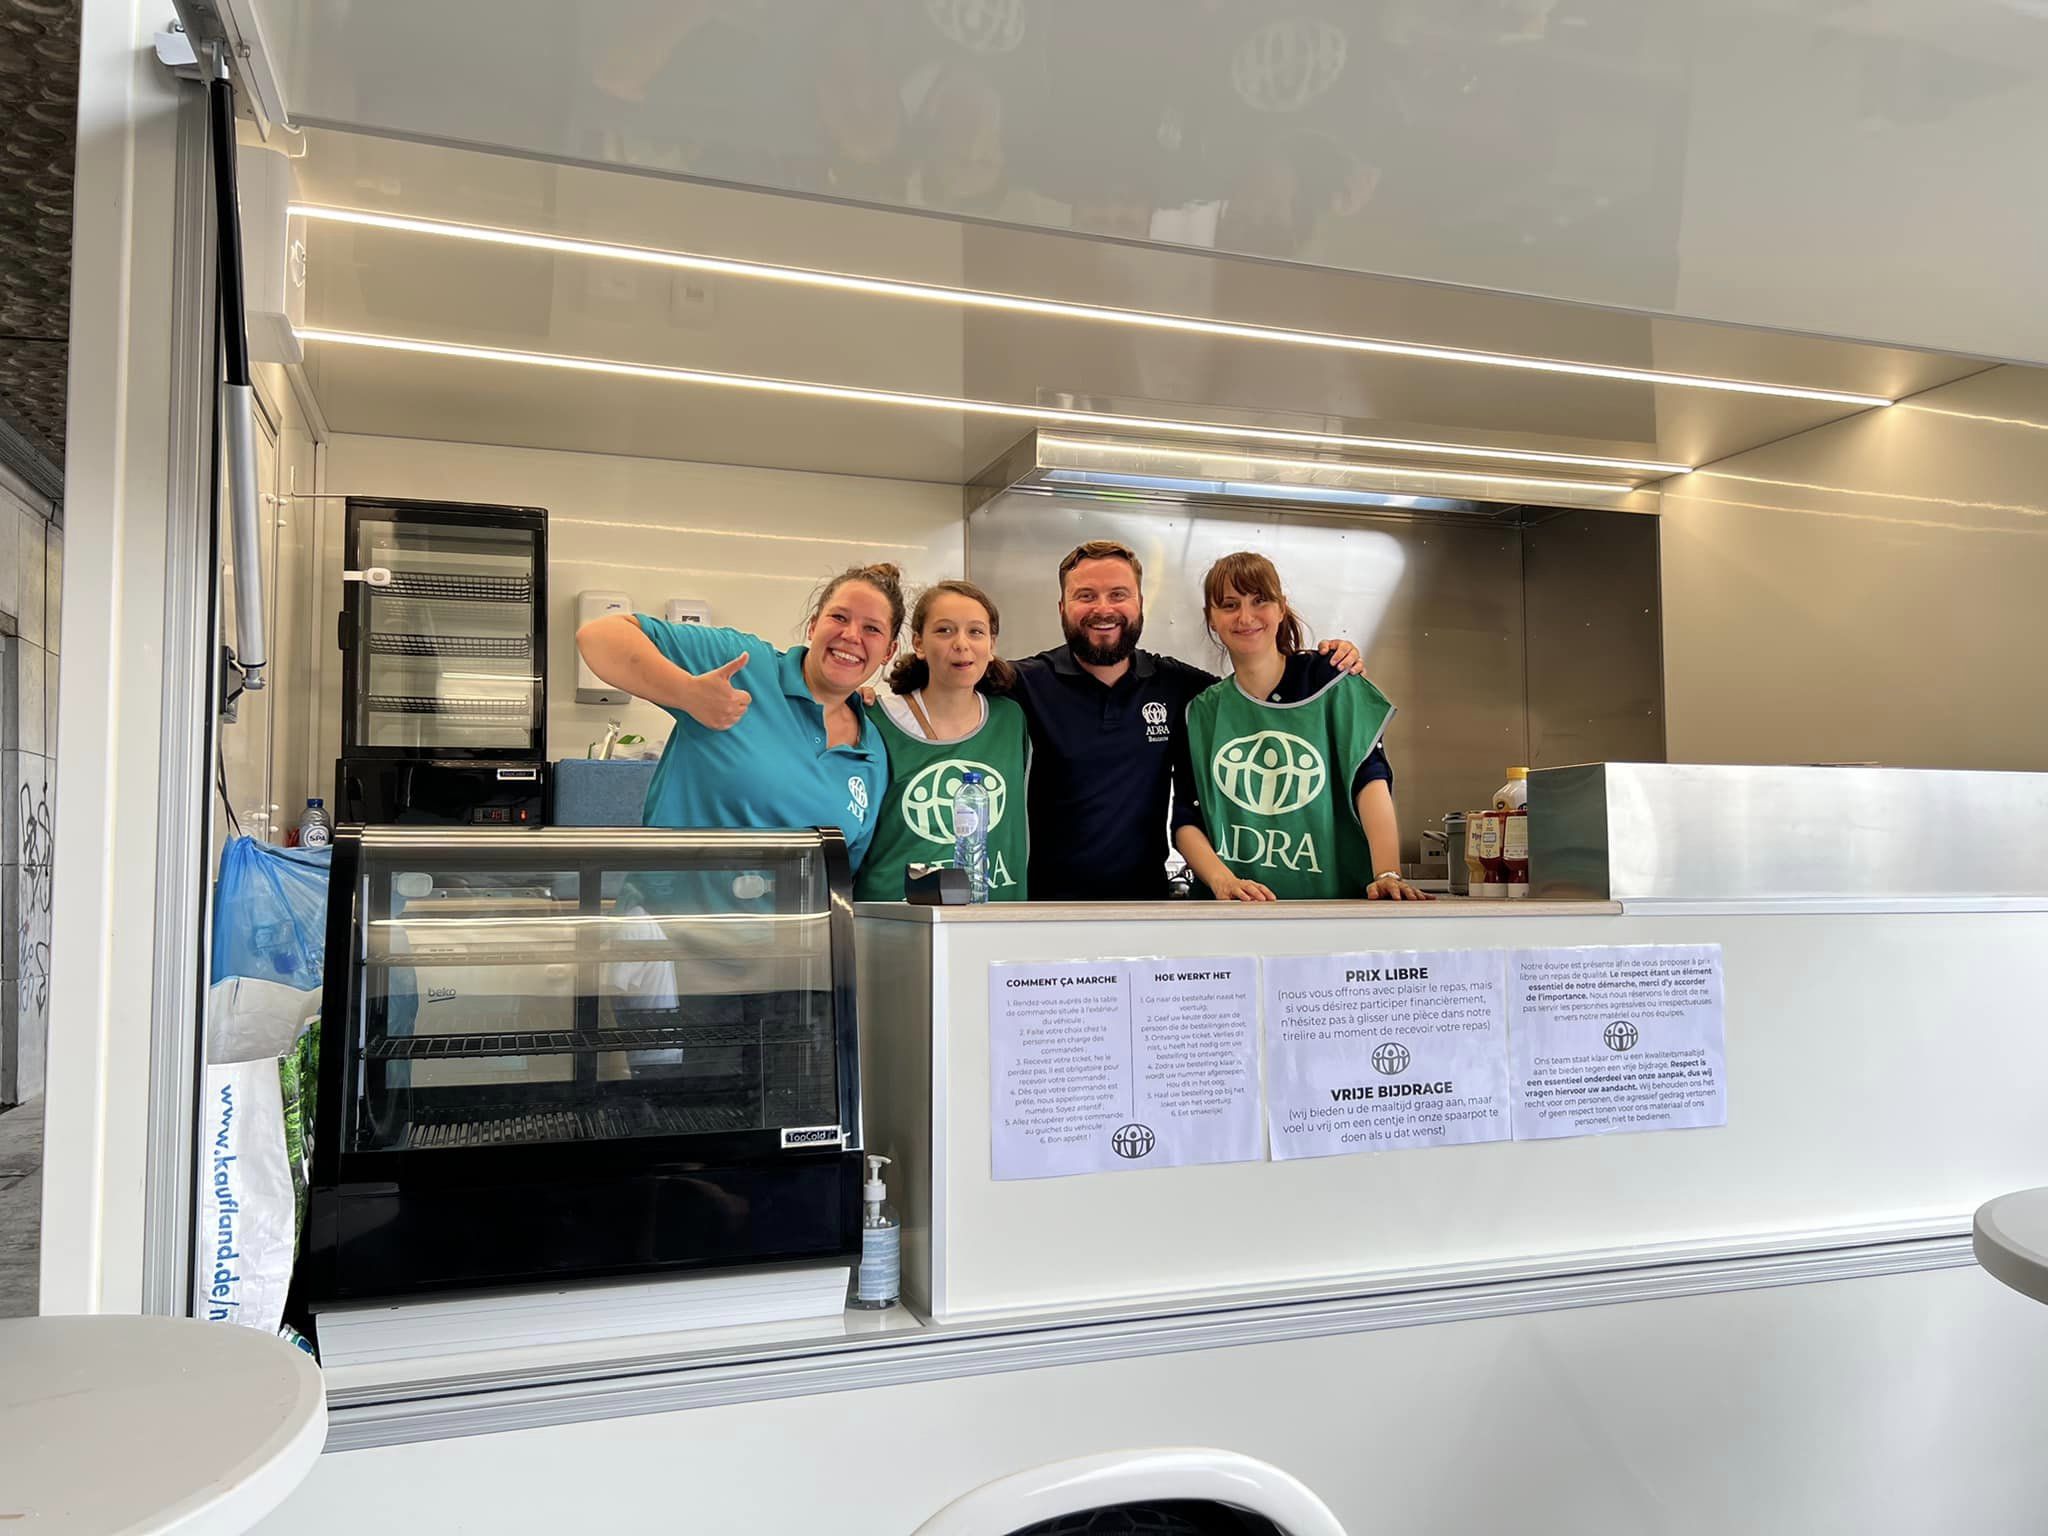 The Social Food Truck brought an innovation prize to ADRA Belgium